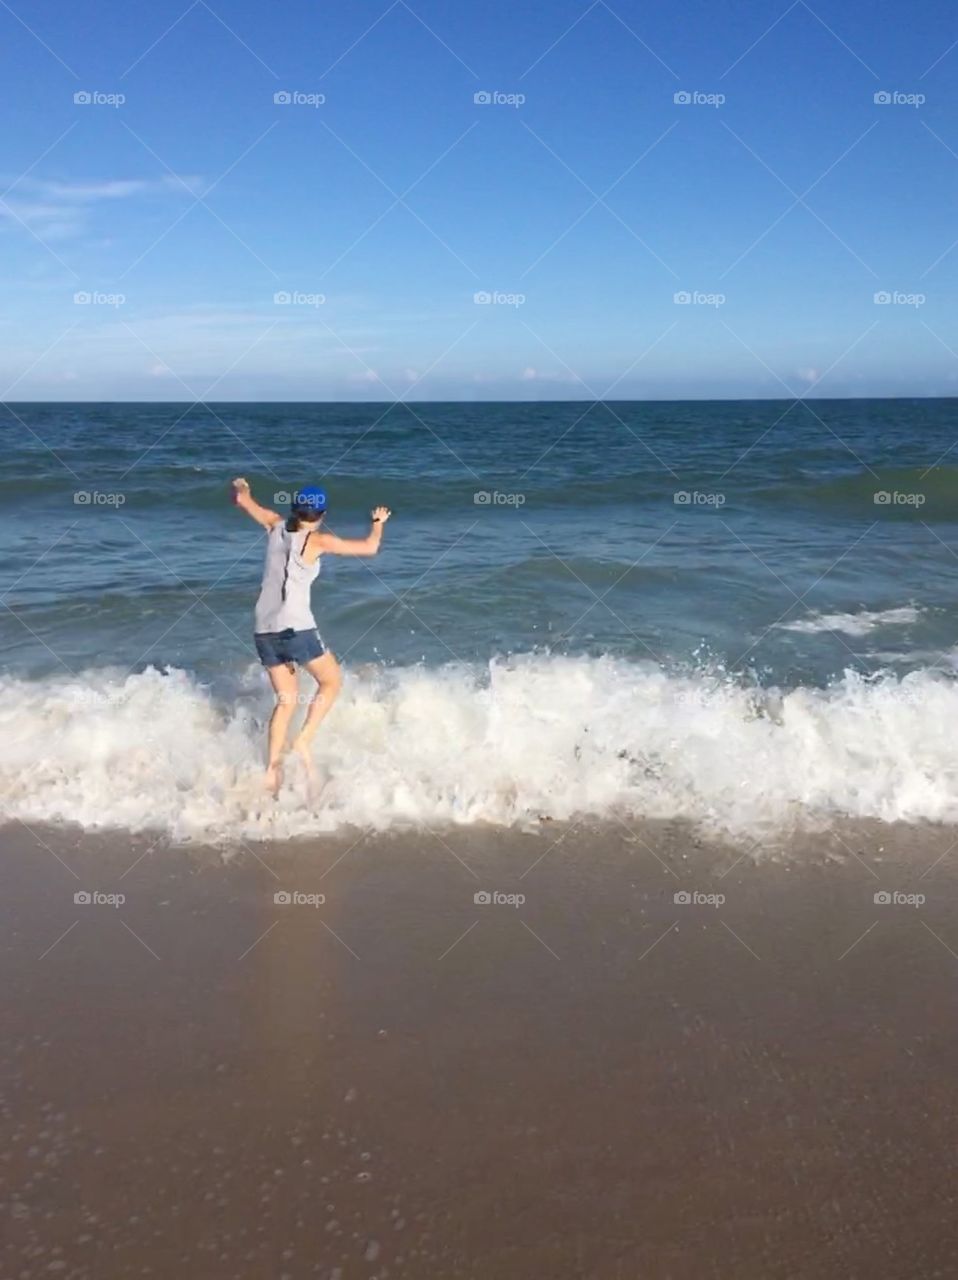 Girl running into the ocean in vero beach Florida, don't let the clear skies and shorts fool you, it's December and that water was COLD 